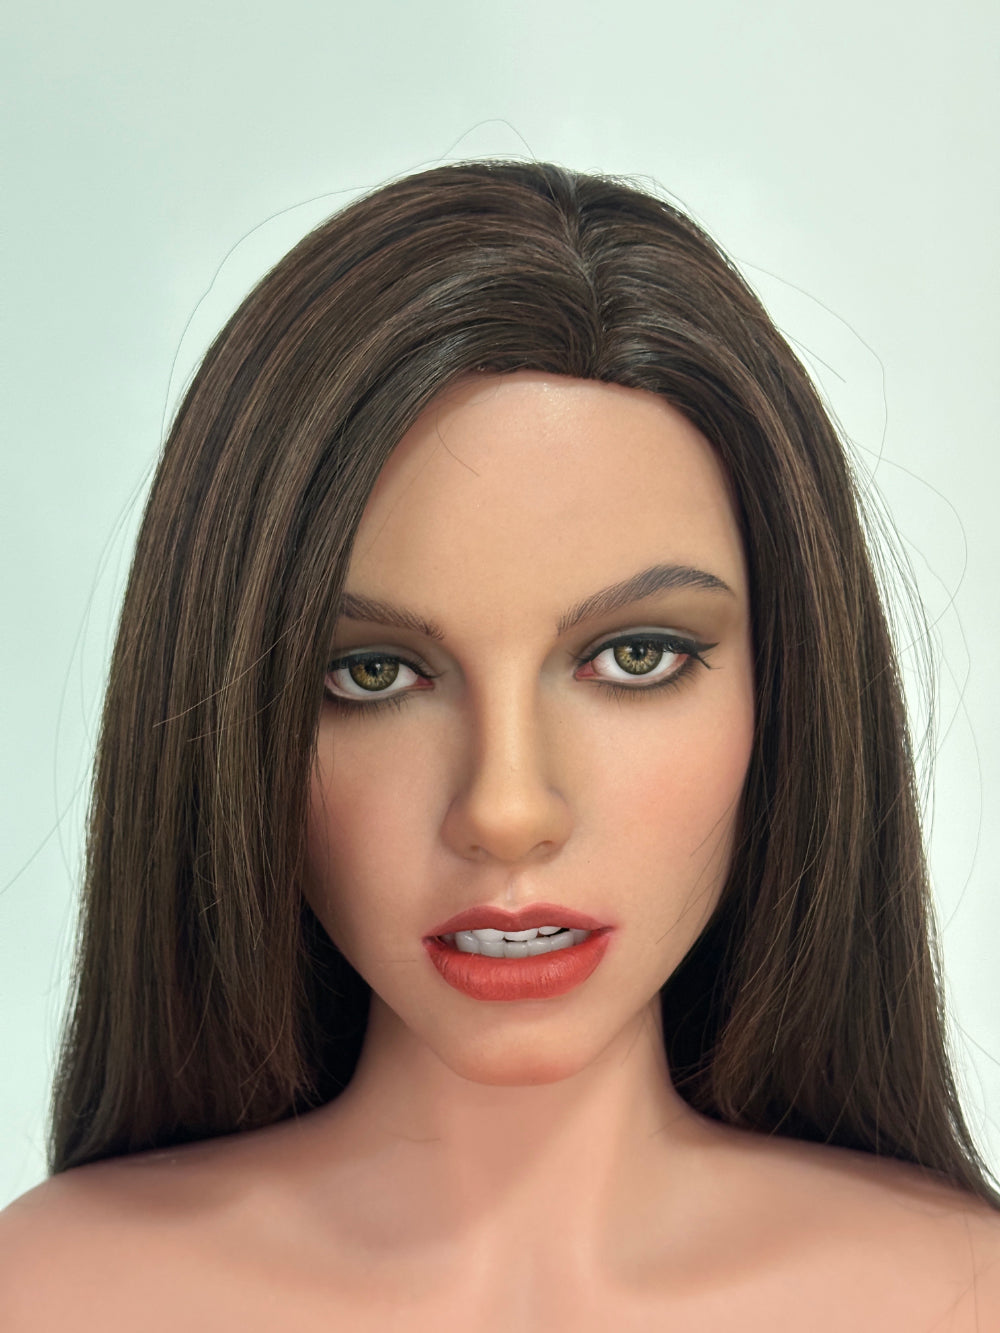 Zelex Doll SLE Series 163 cm E Silicone - ZXE206-3 Movable Jaw